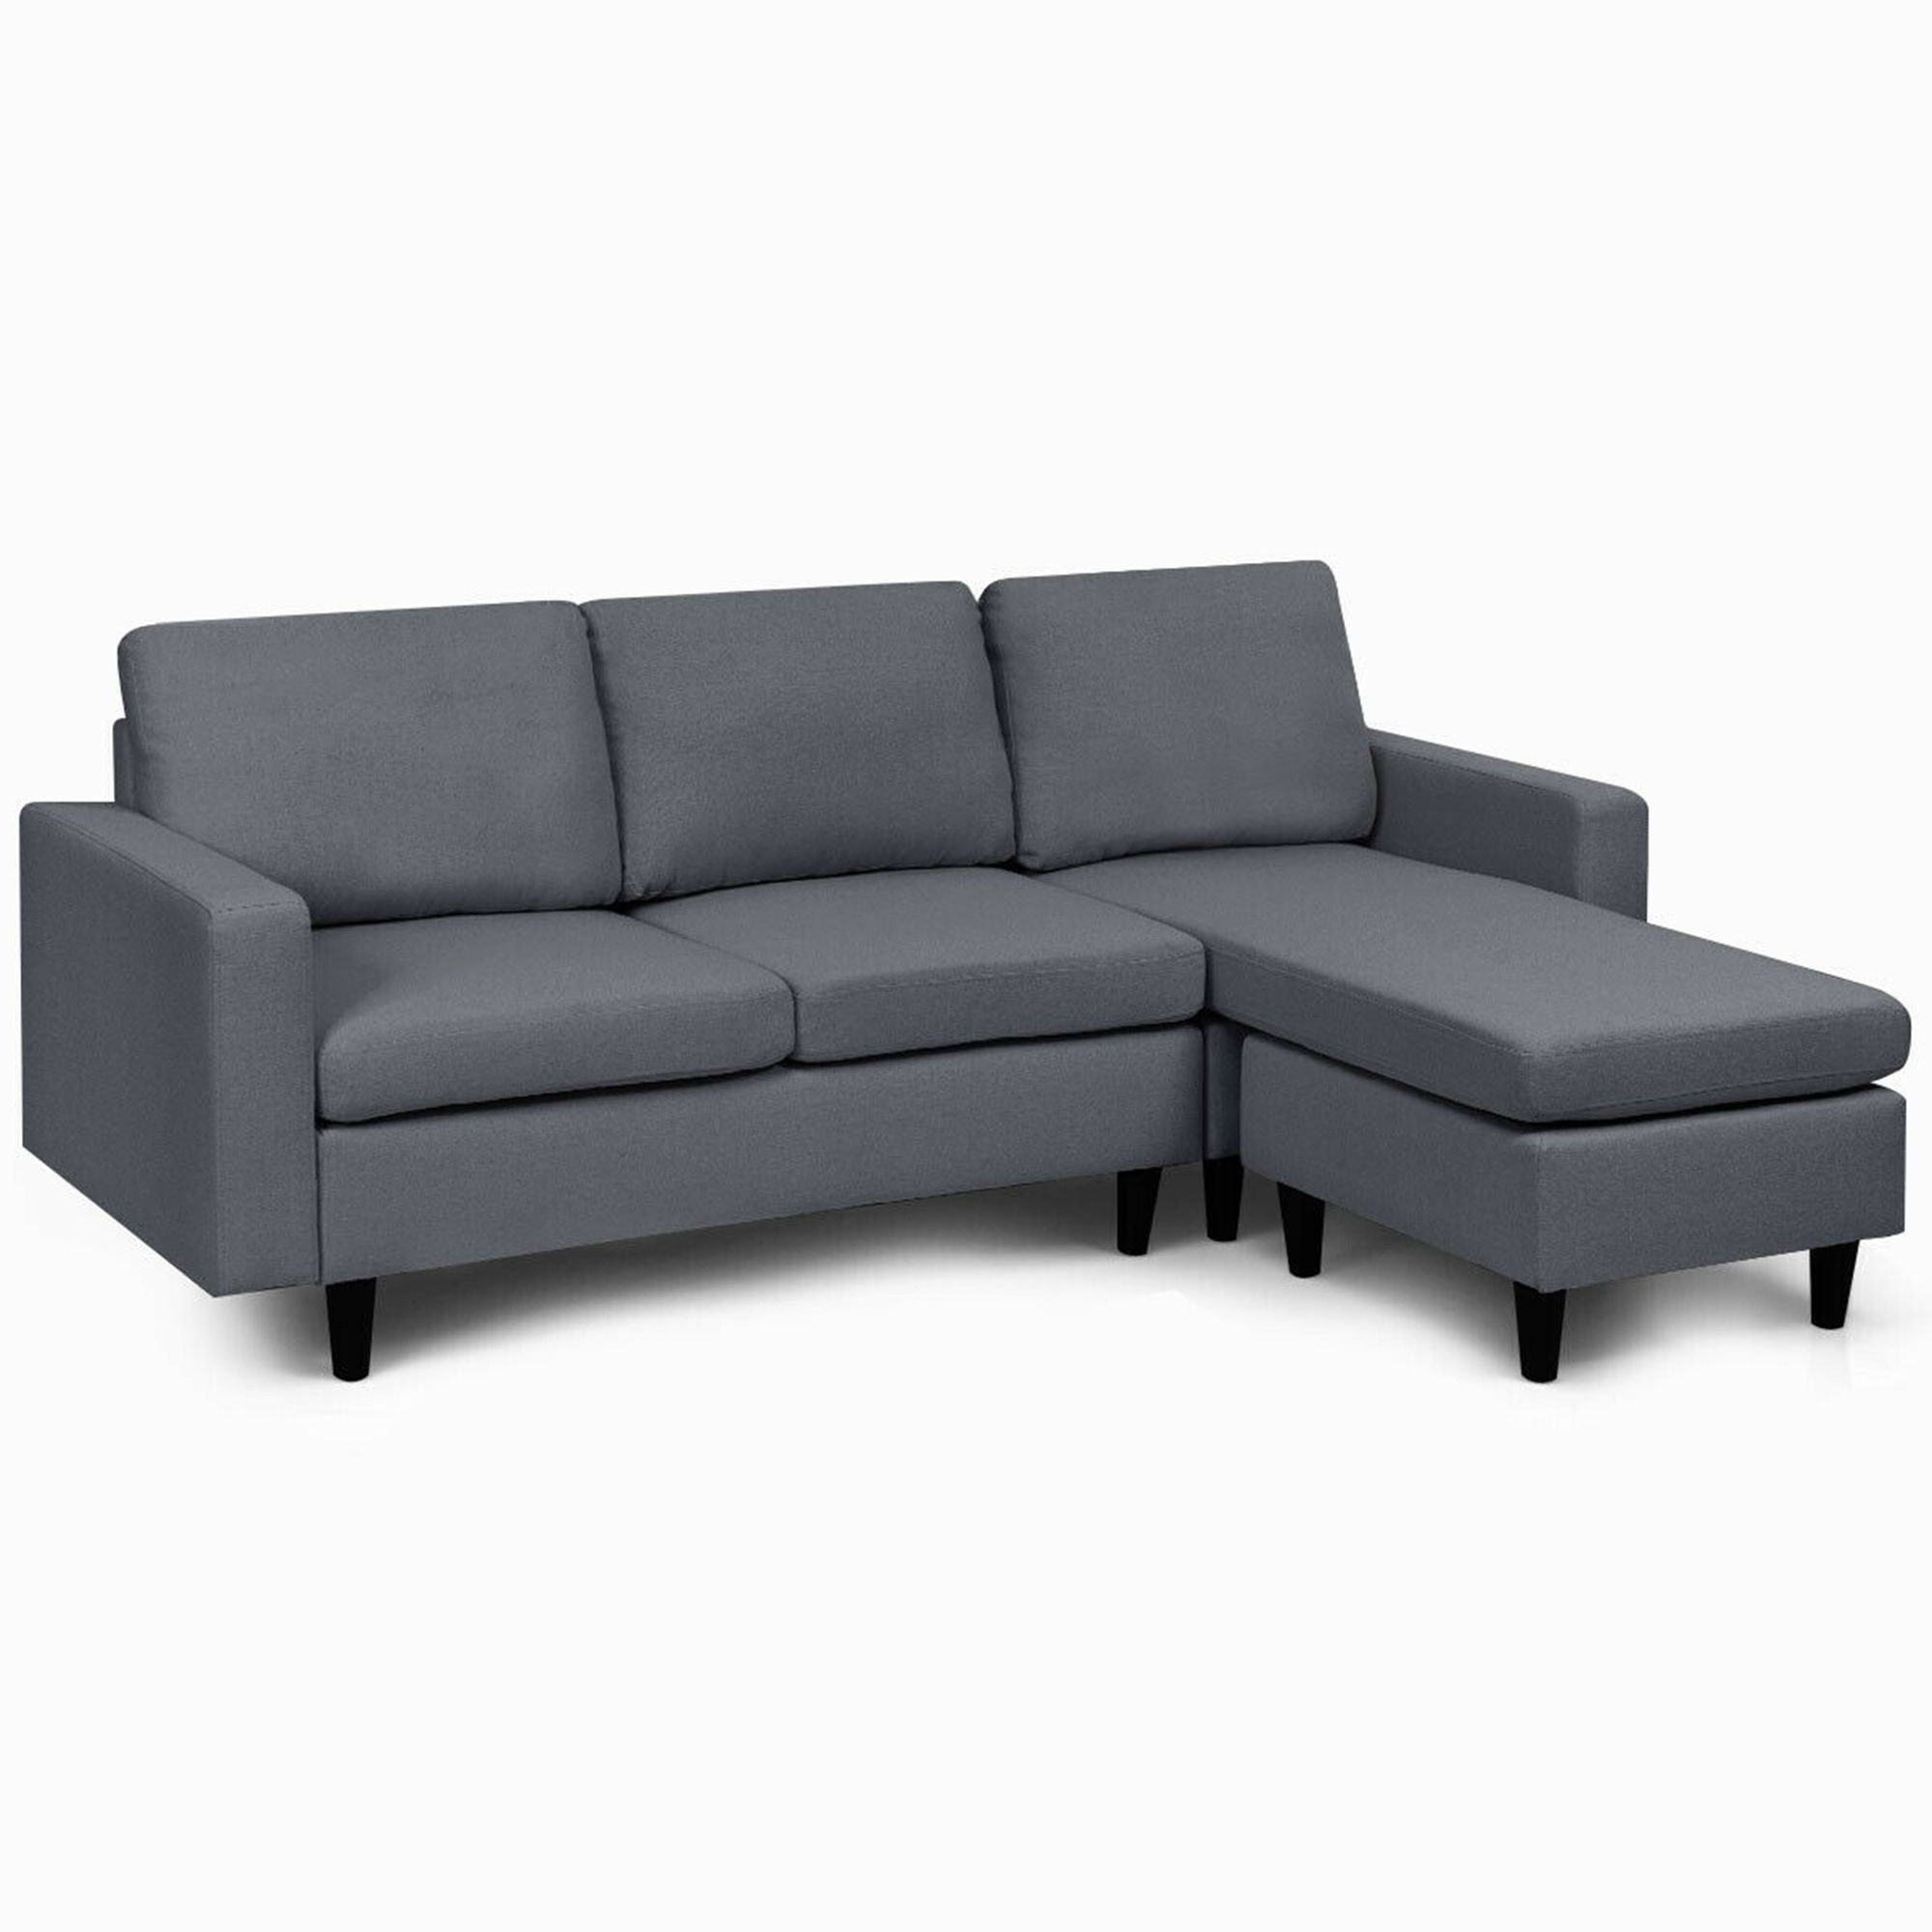 Convertible L Shaped Sectional Sofa Couch W/ Cushion Dark Gray | Ebay Inside Convertible L Shaped Sectional Sofas (Gallery 16 of 20)